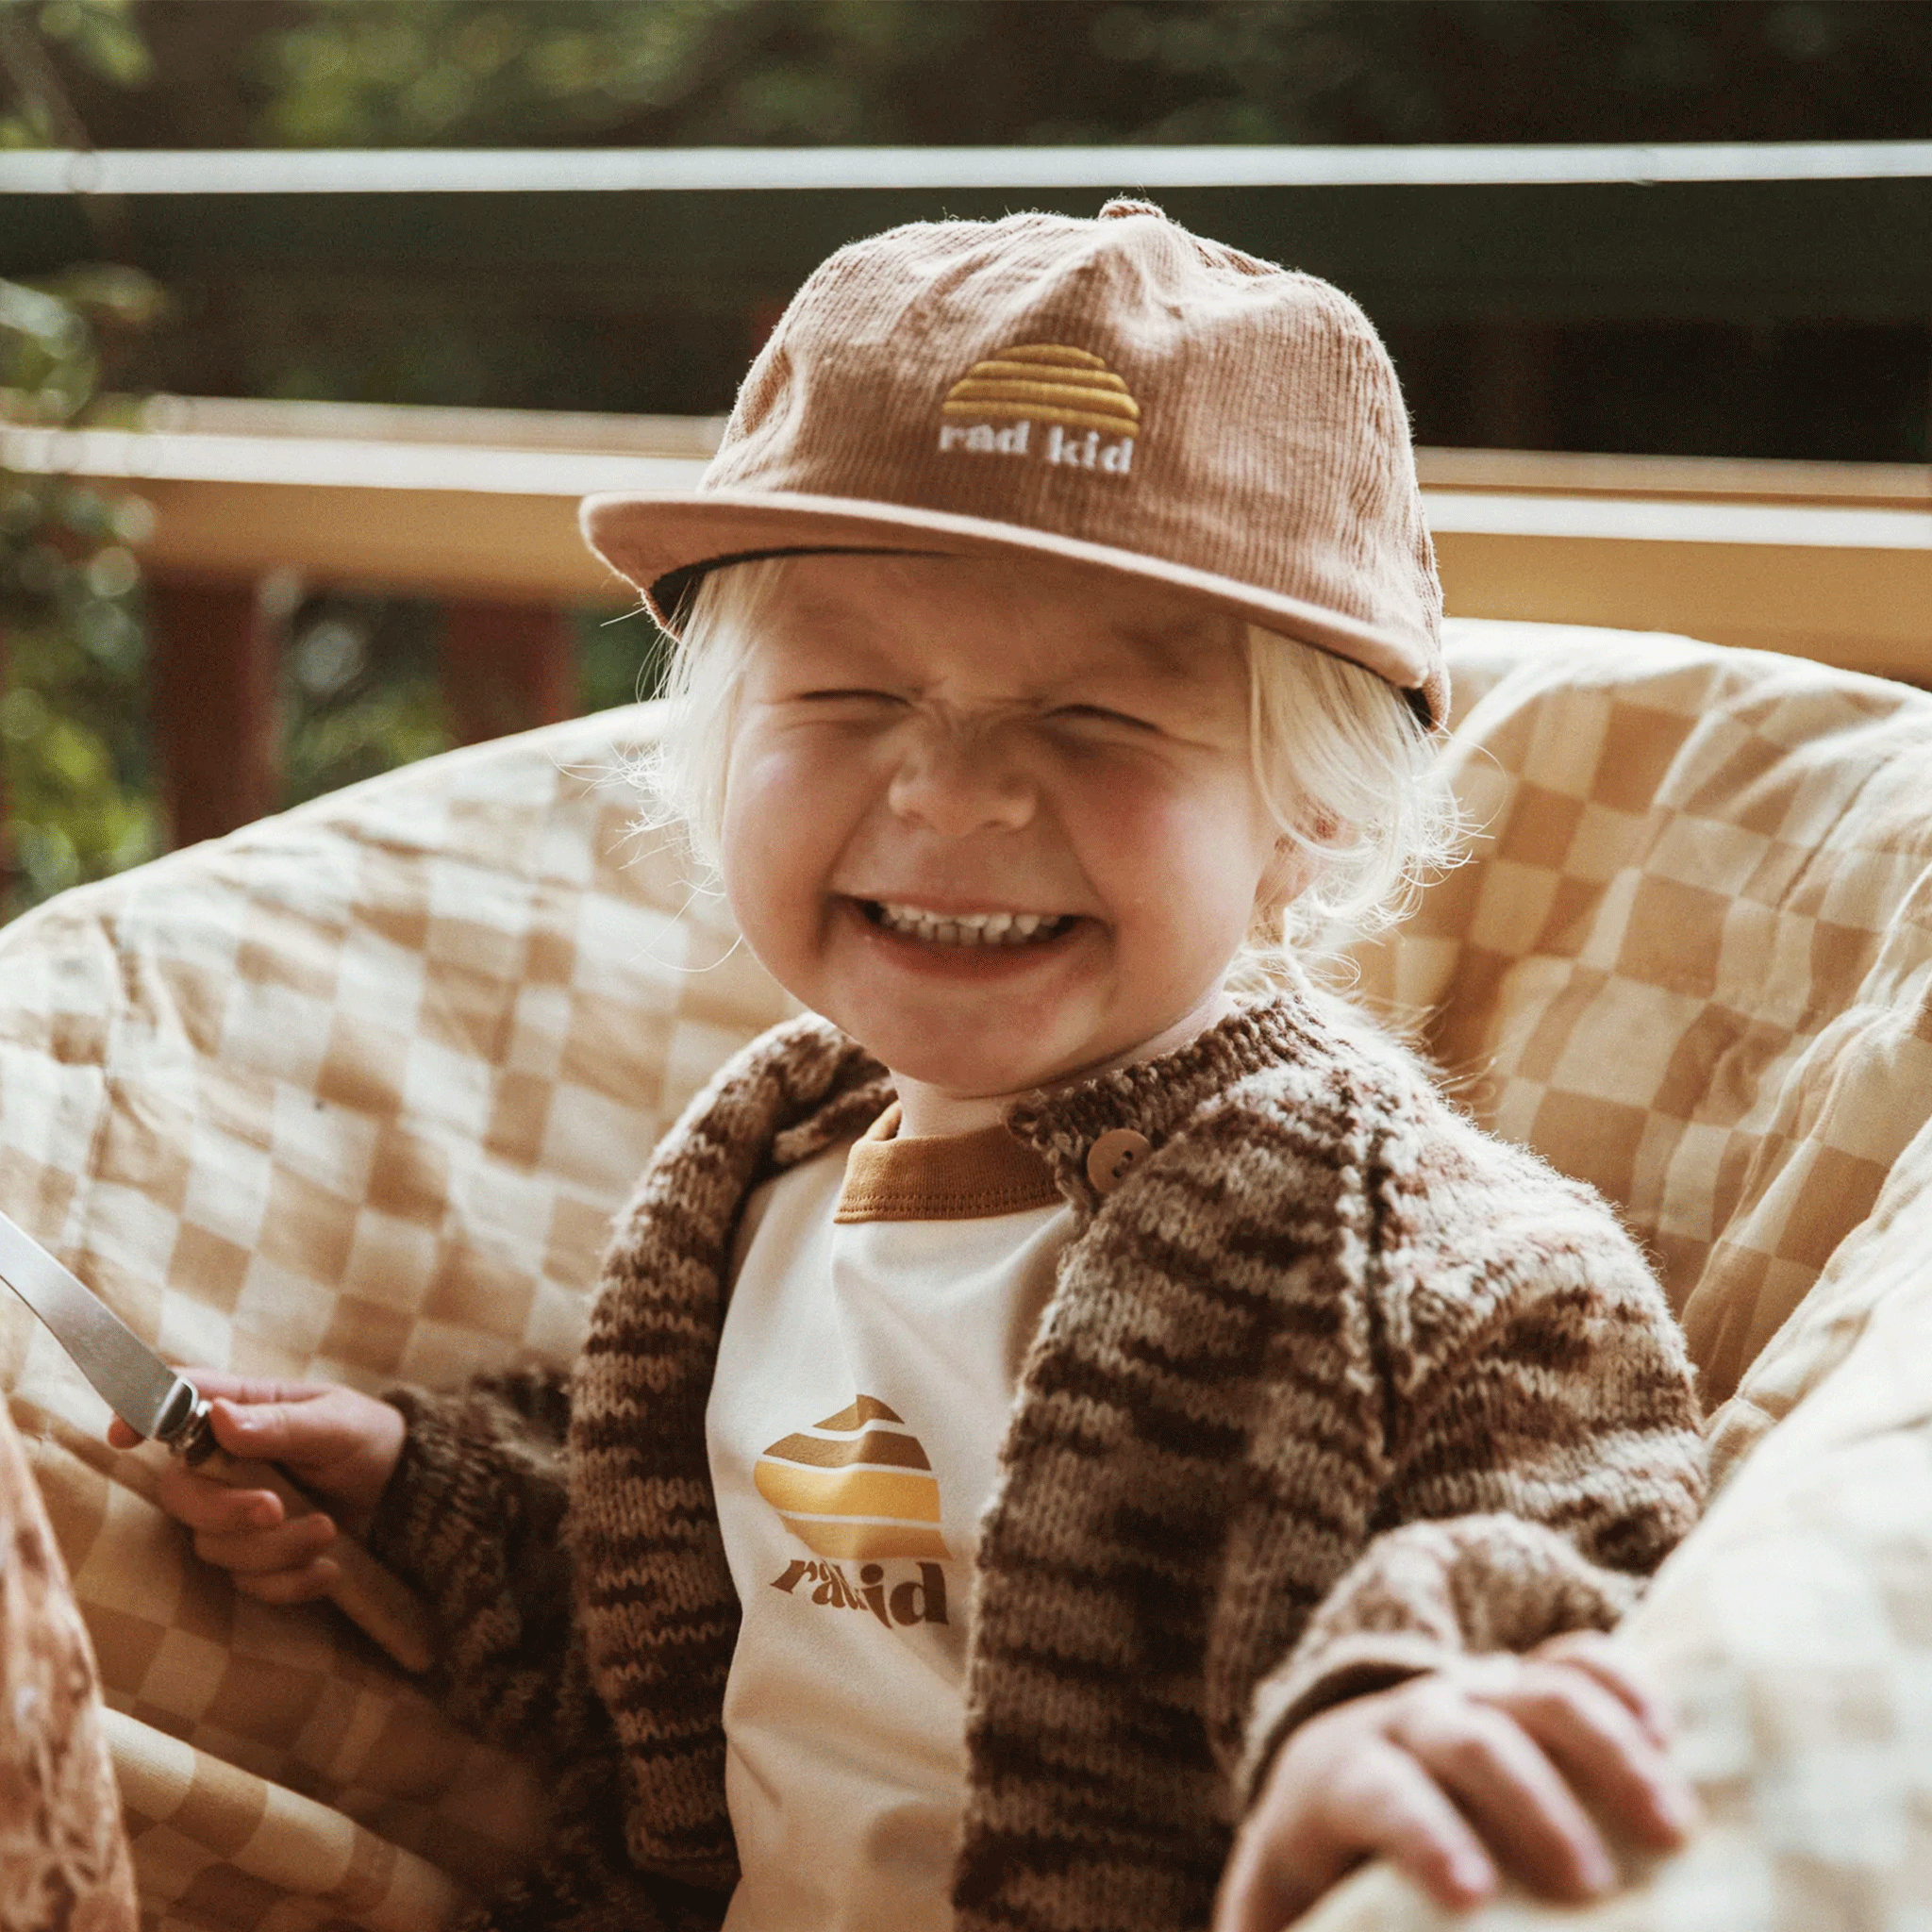 A children&#39;s model wearing a tan corduroy hat with a yellow sun logo and white text below it that reads, &quot;rad kid&quot;.